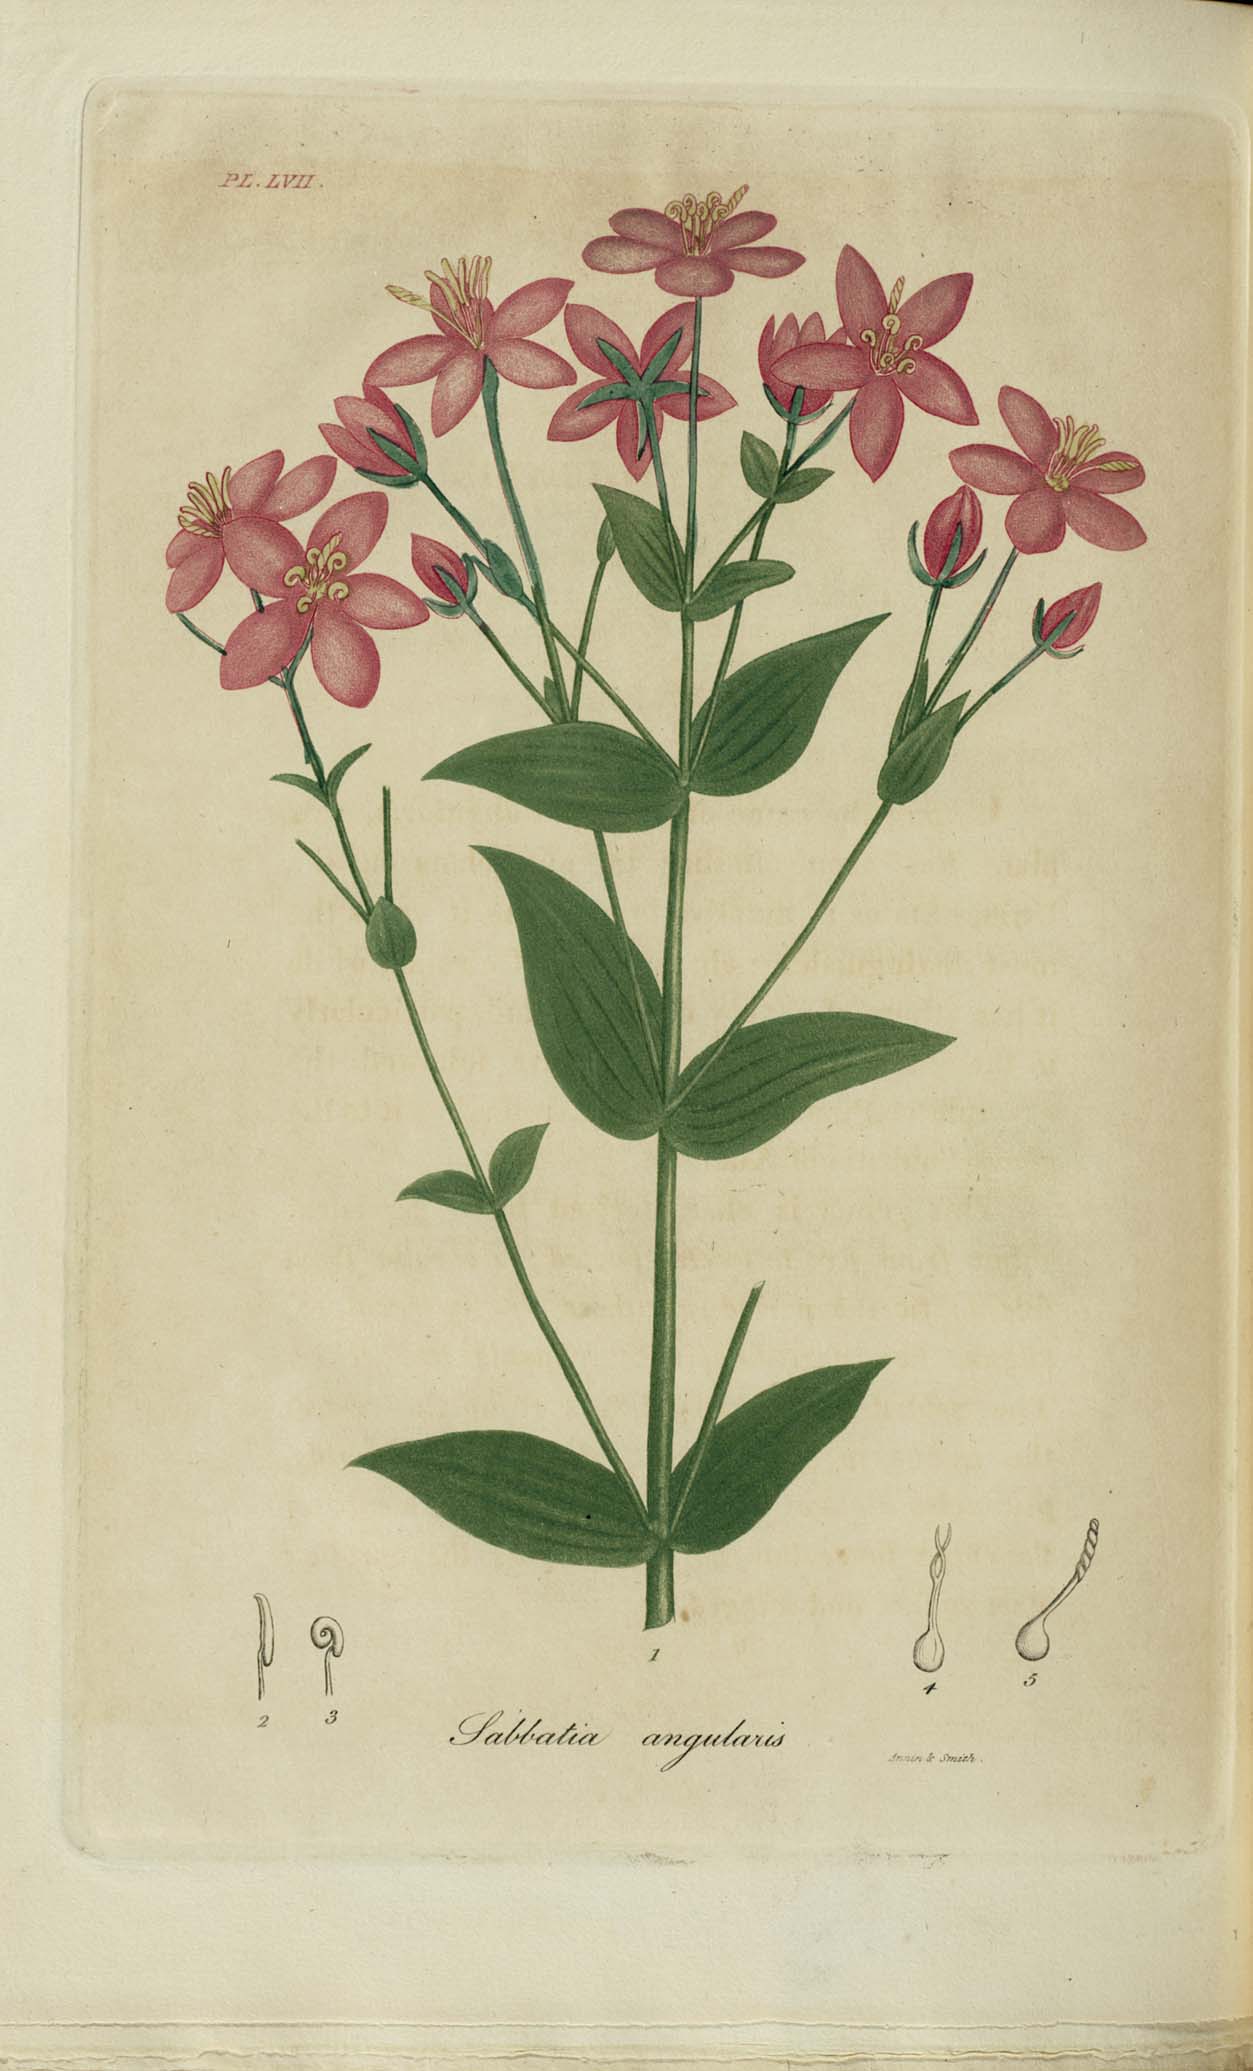 a drawing of some pink flowers with leaves